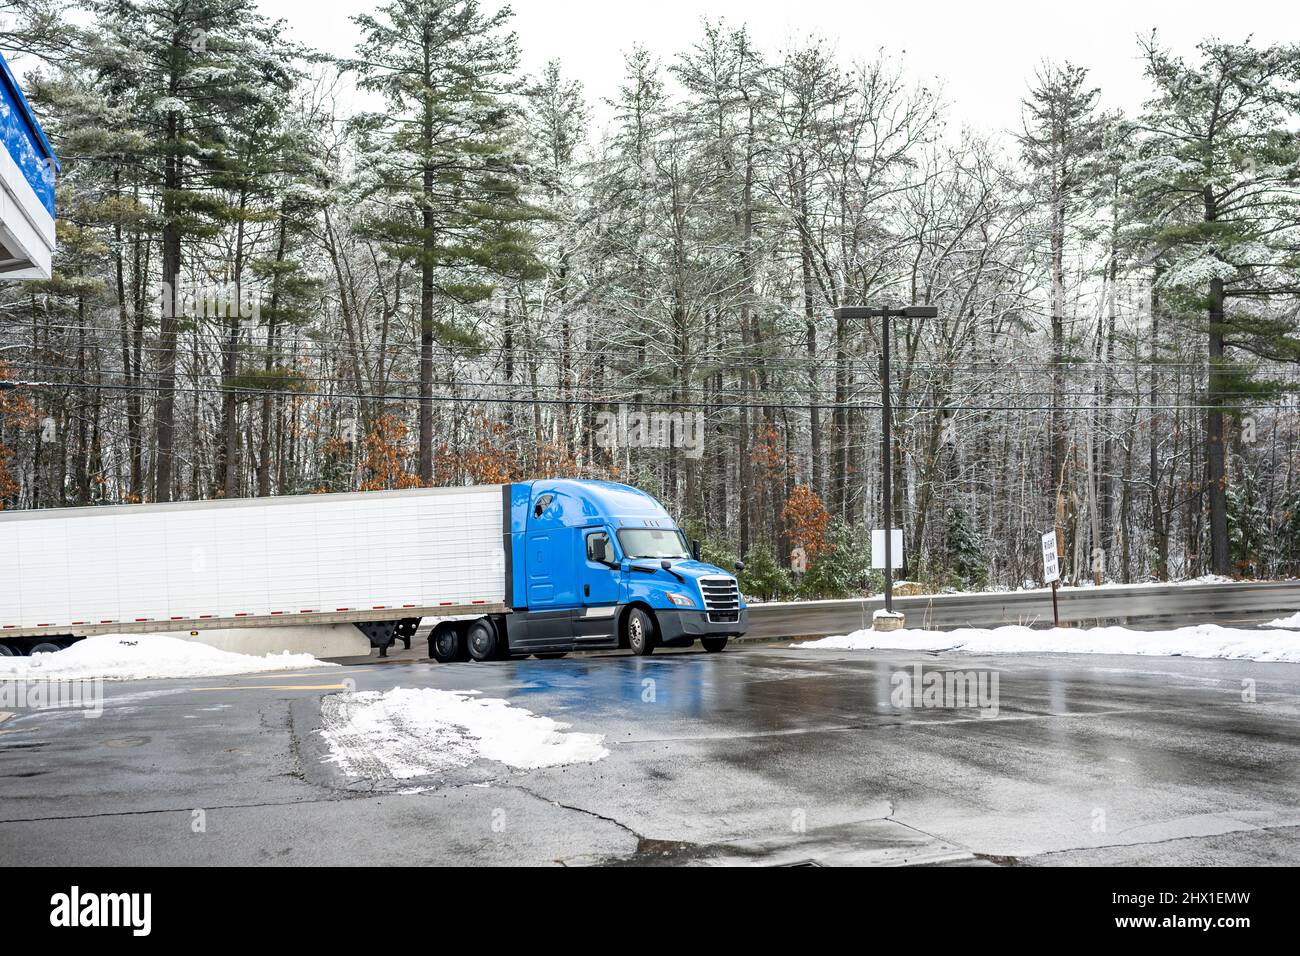 Industrial blue bonnet big rig long haul semi truck transporting cargo in refrigerator semi trailer turning on the truck stop entrance with snow and i Stock Photo